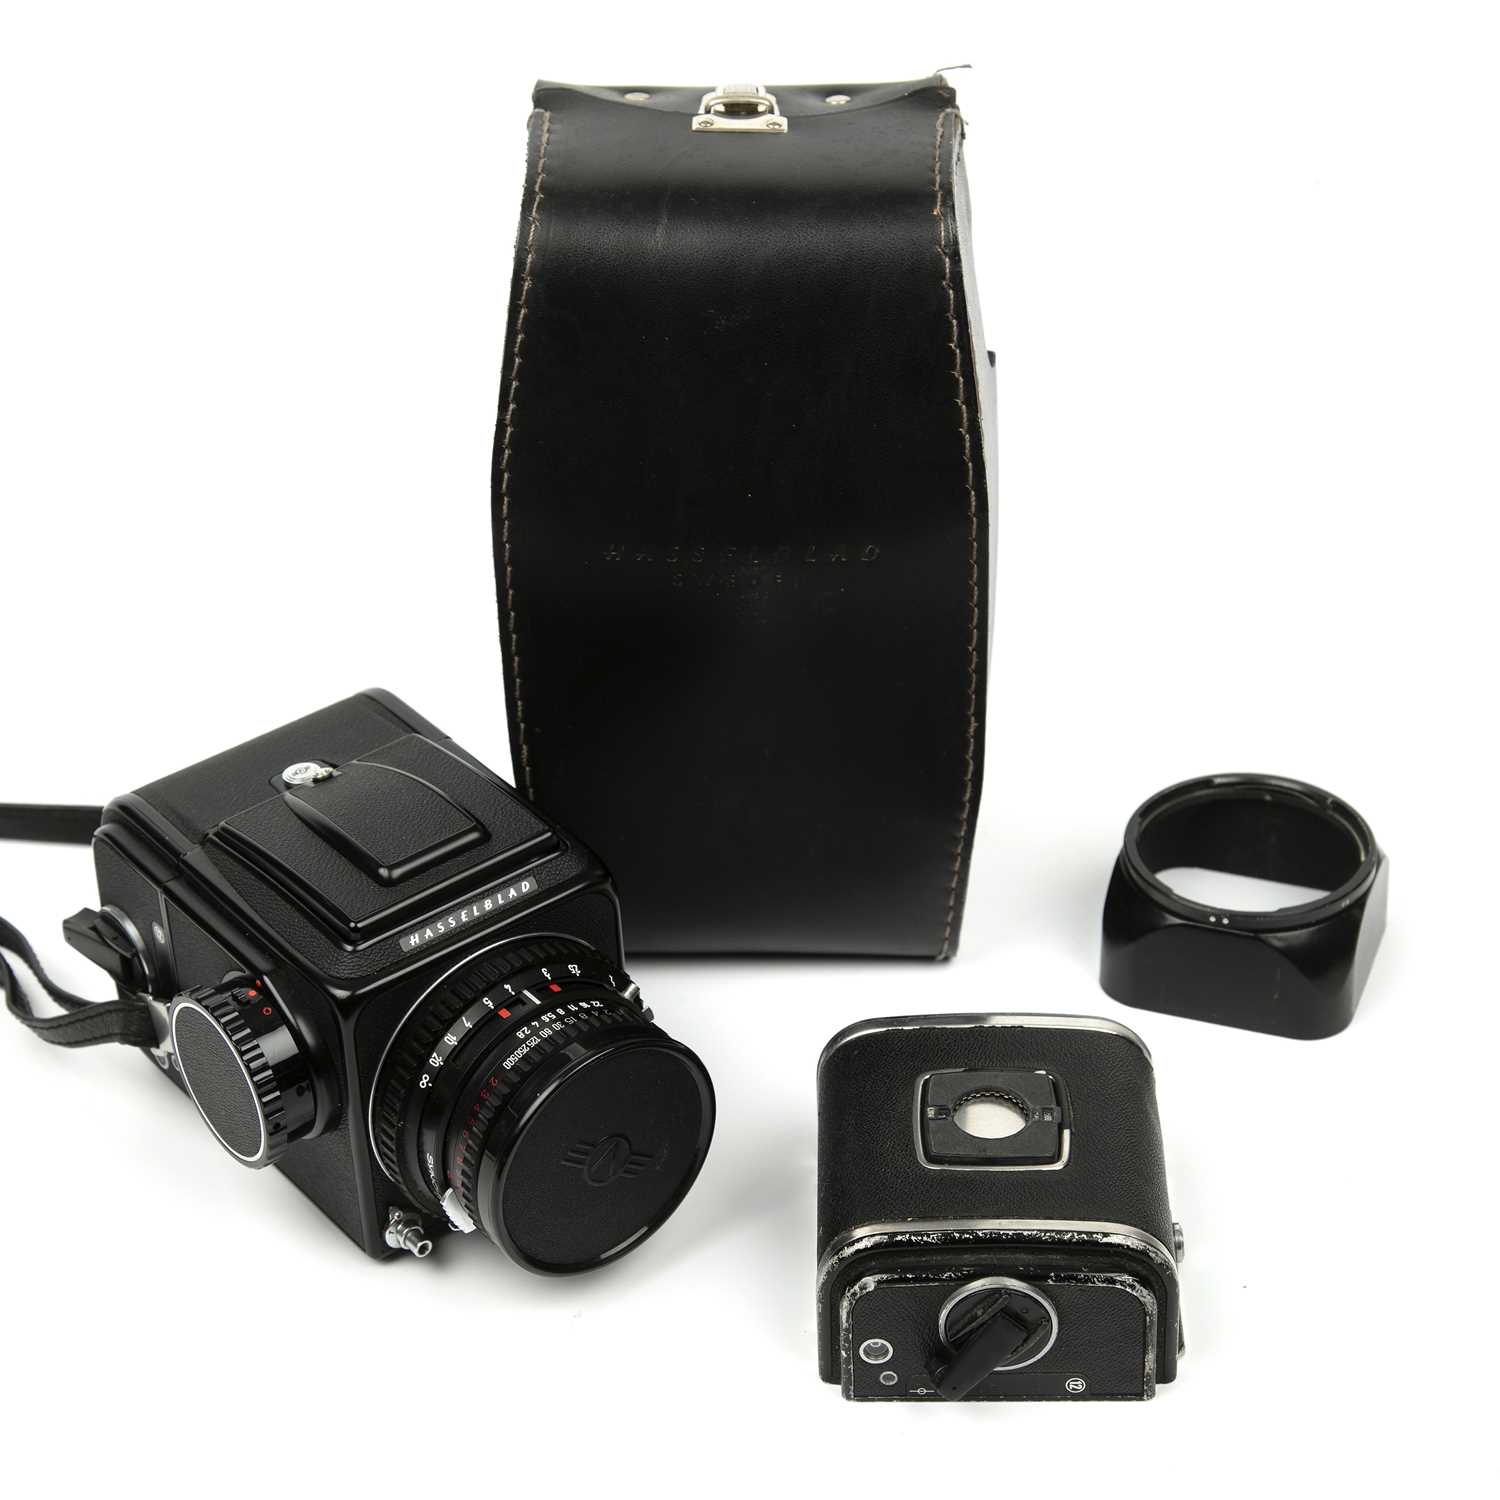 A Hasselblad 500C/M medium format camera with a Carl Zeiss Planar f/2.8 f=80mm Nr 6273829 - Image 4 of 4